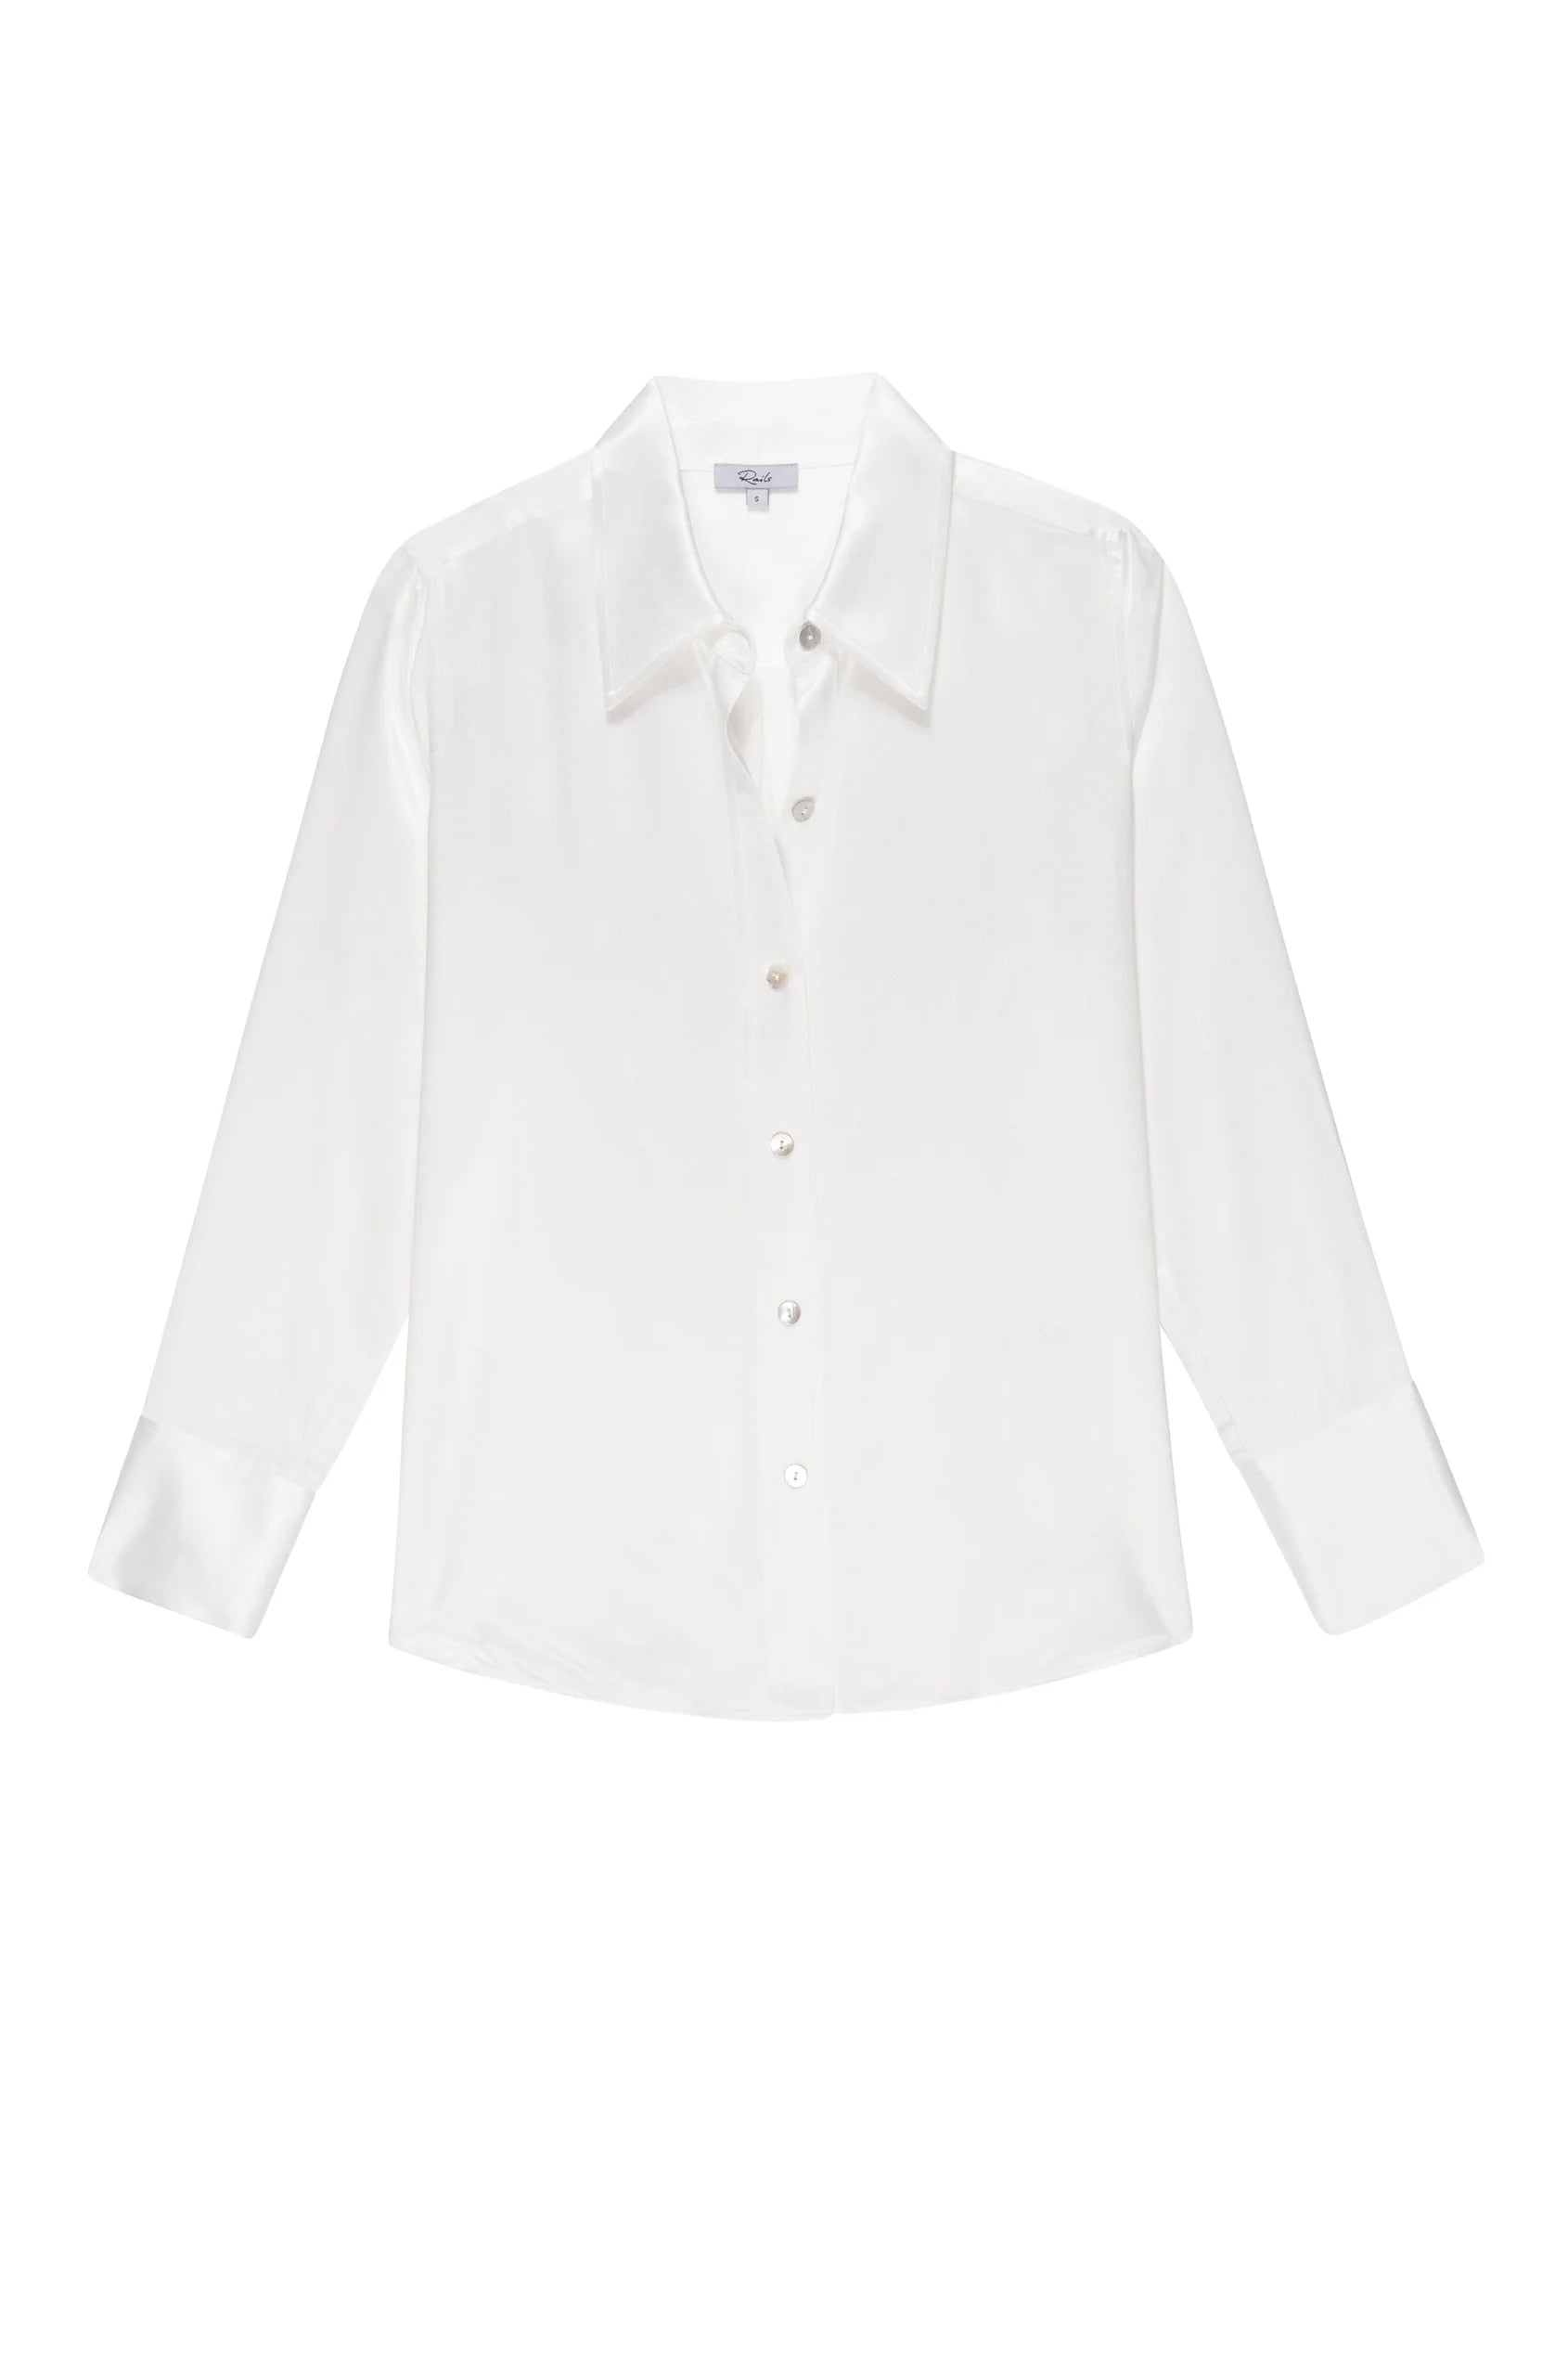 Classic long sleeved shirt cut in a heavy ivory satin viscose